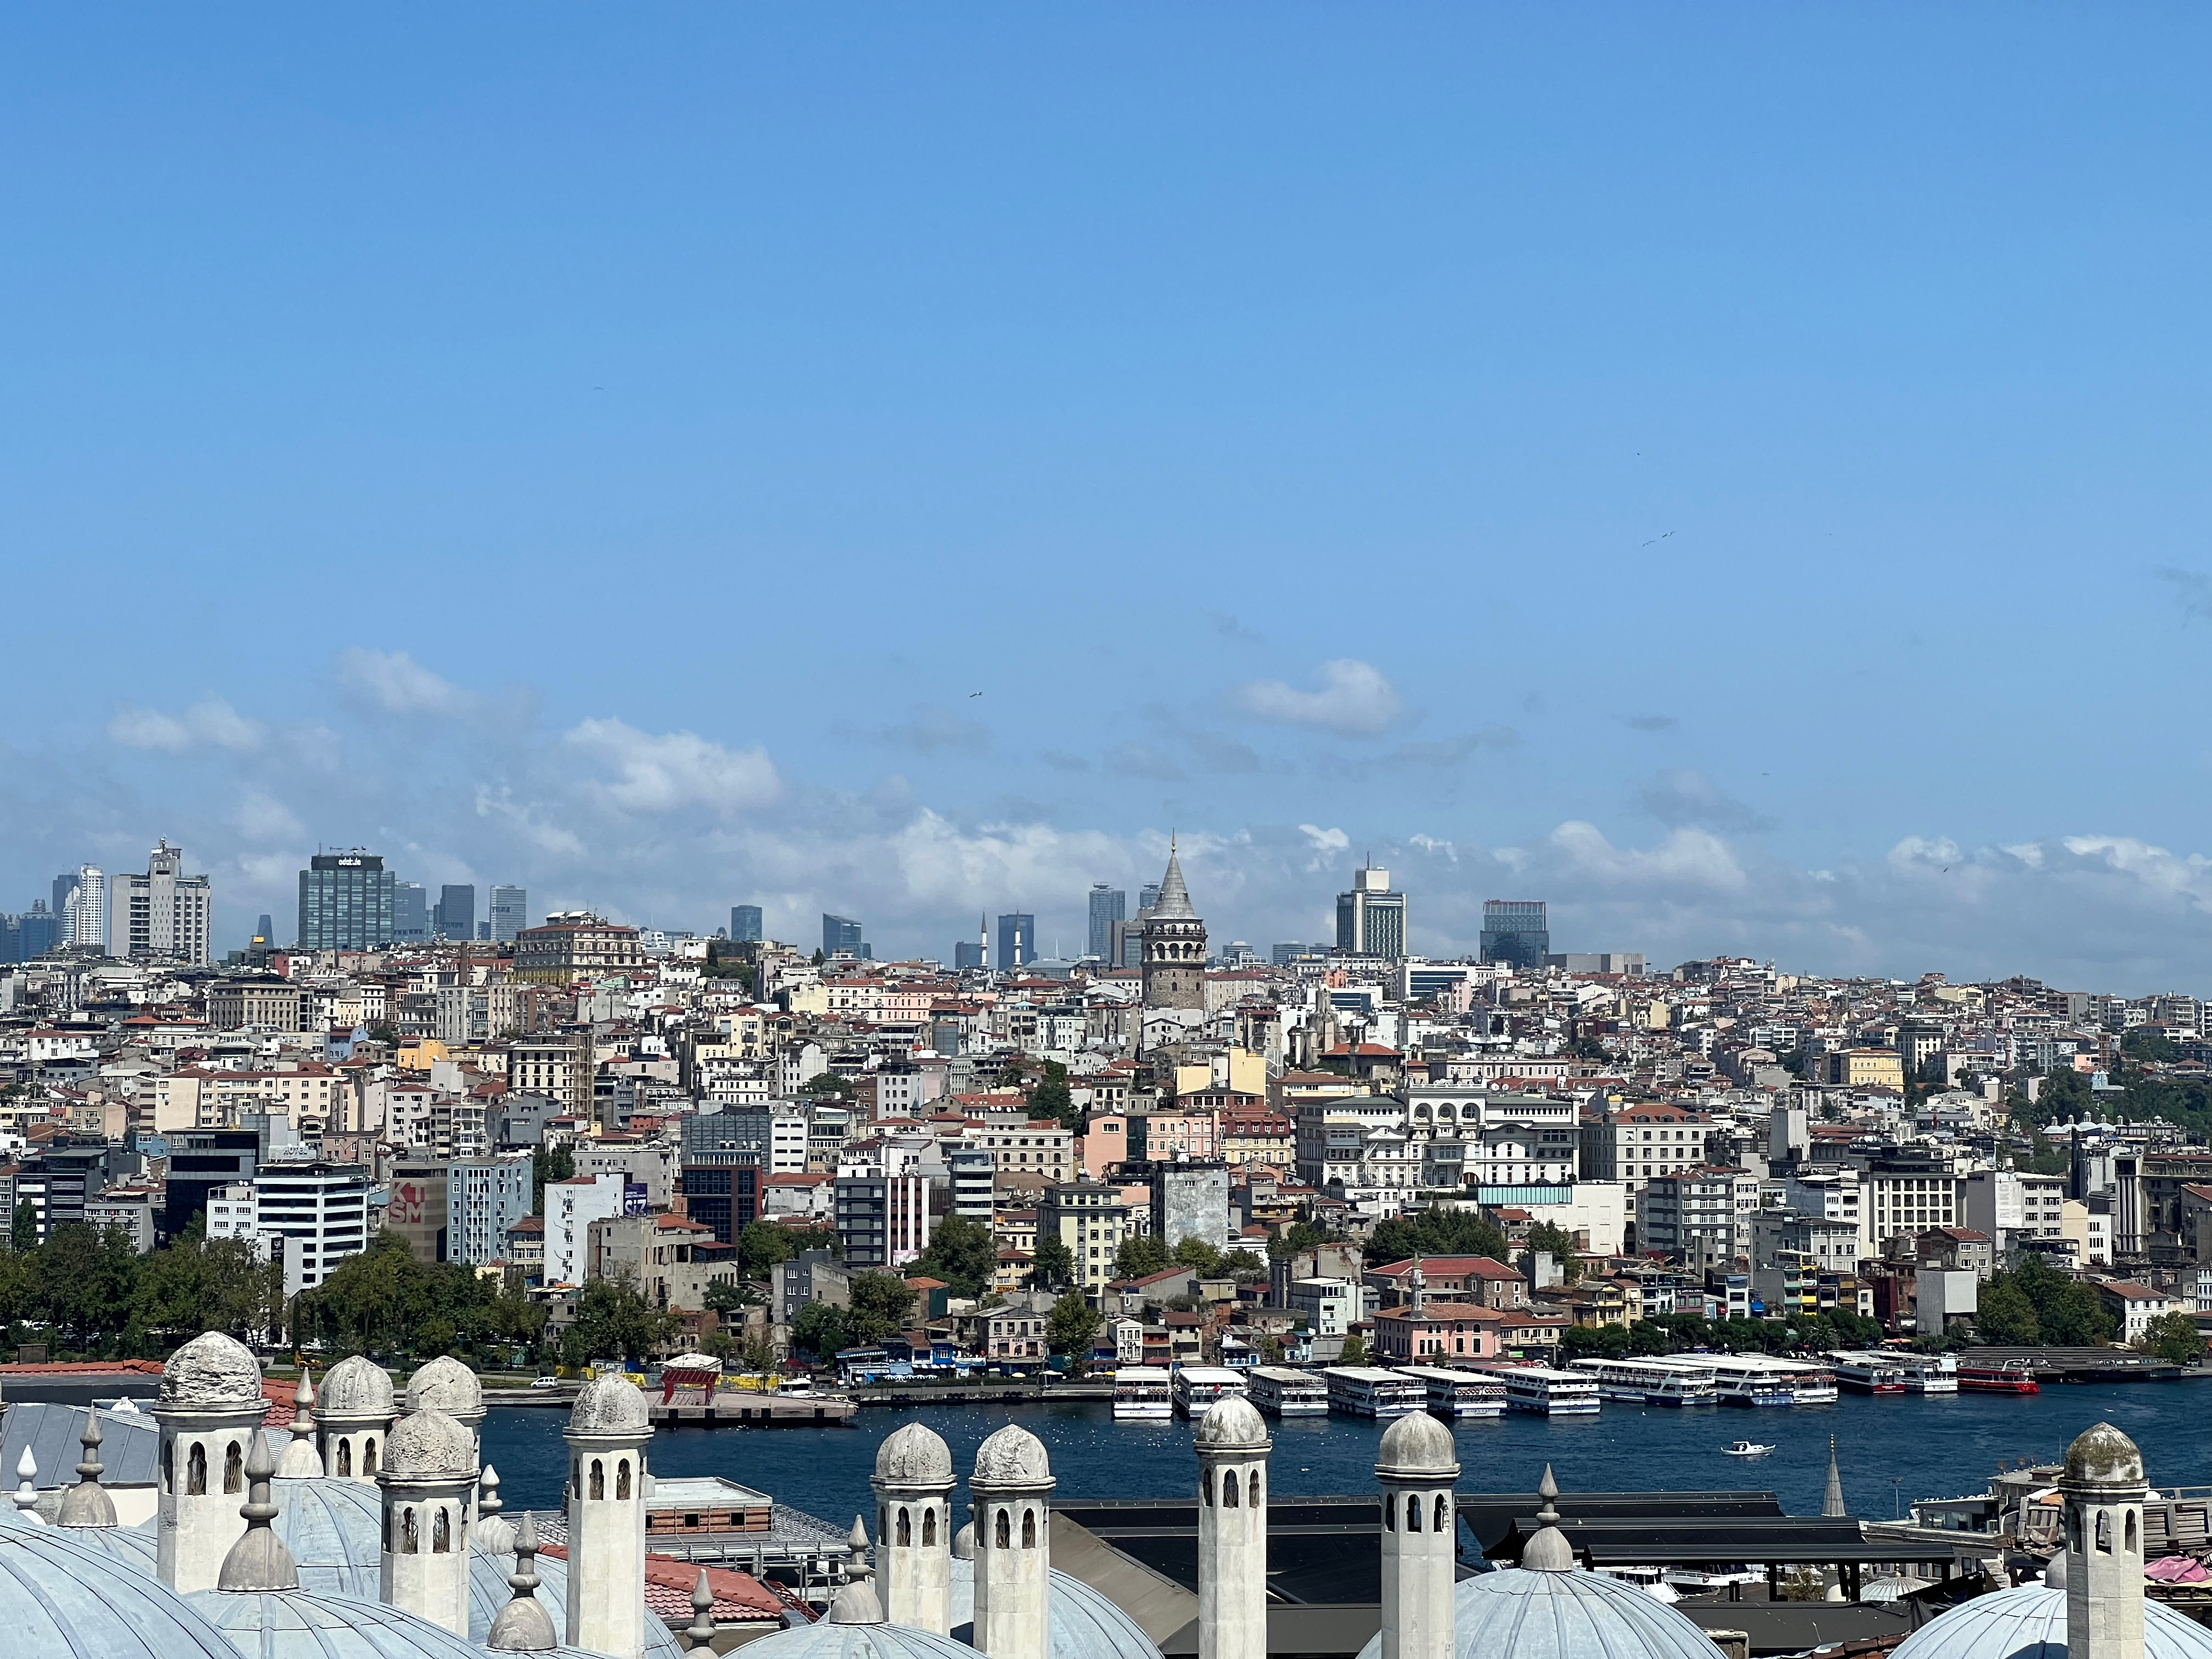 View of the Galata district from the Süleymaniye Mosque